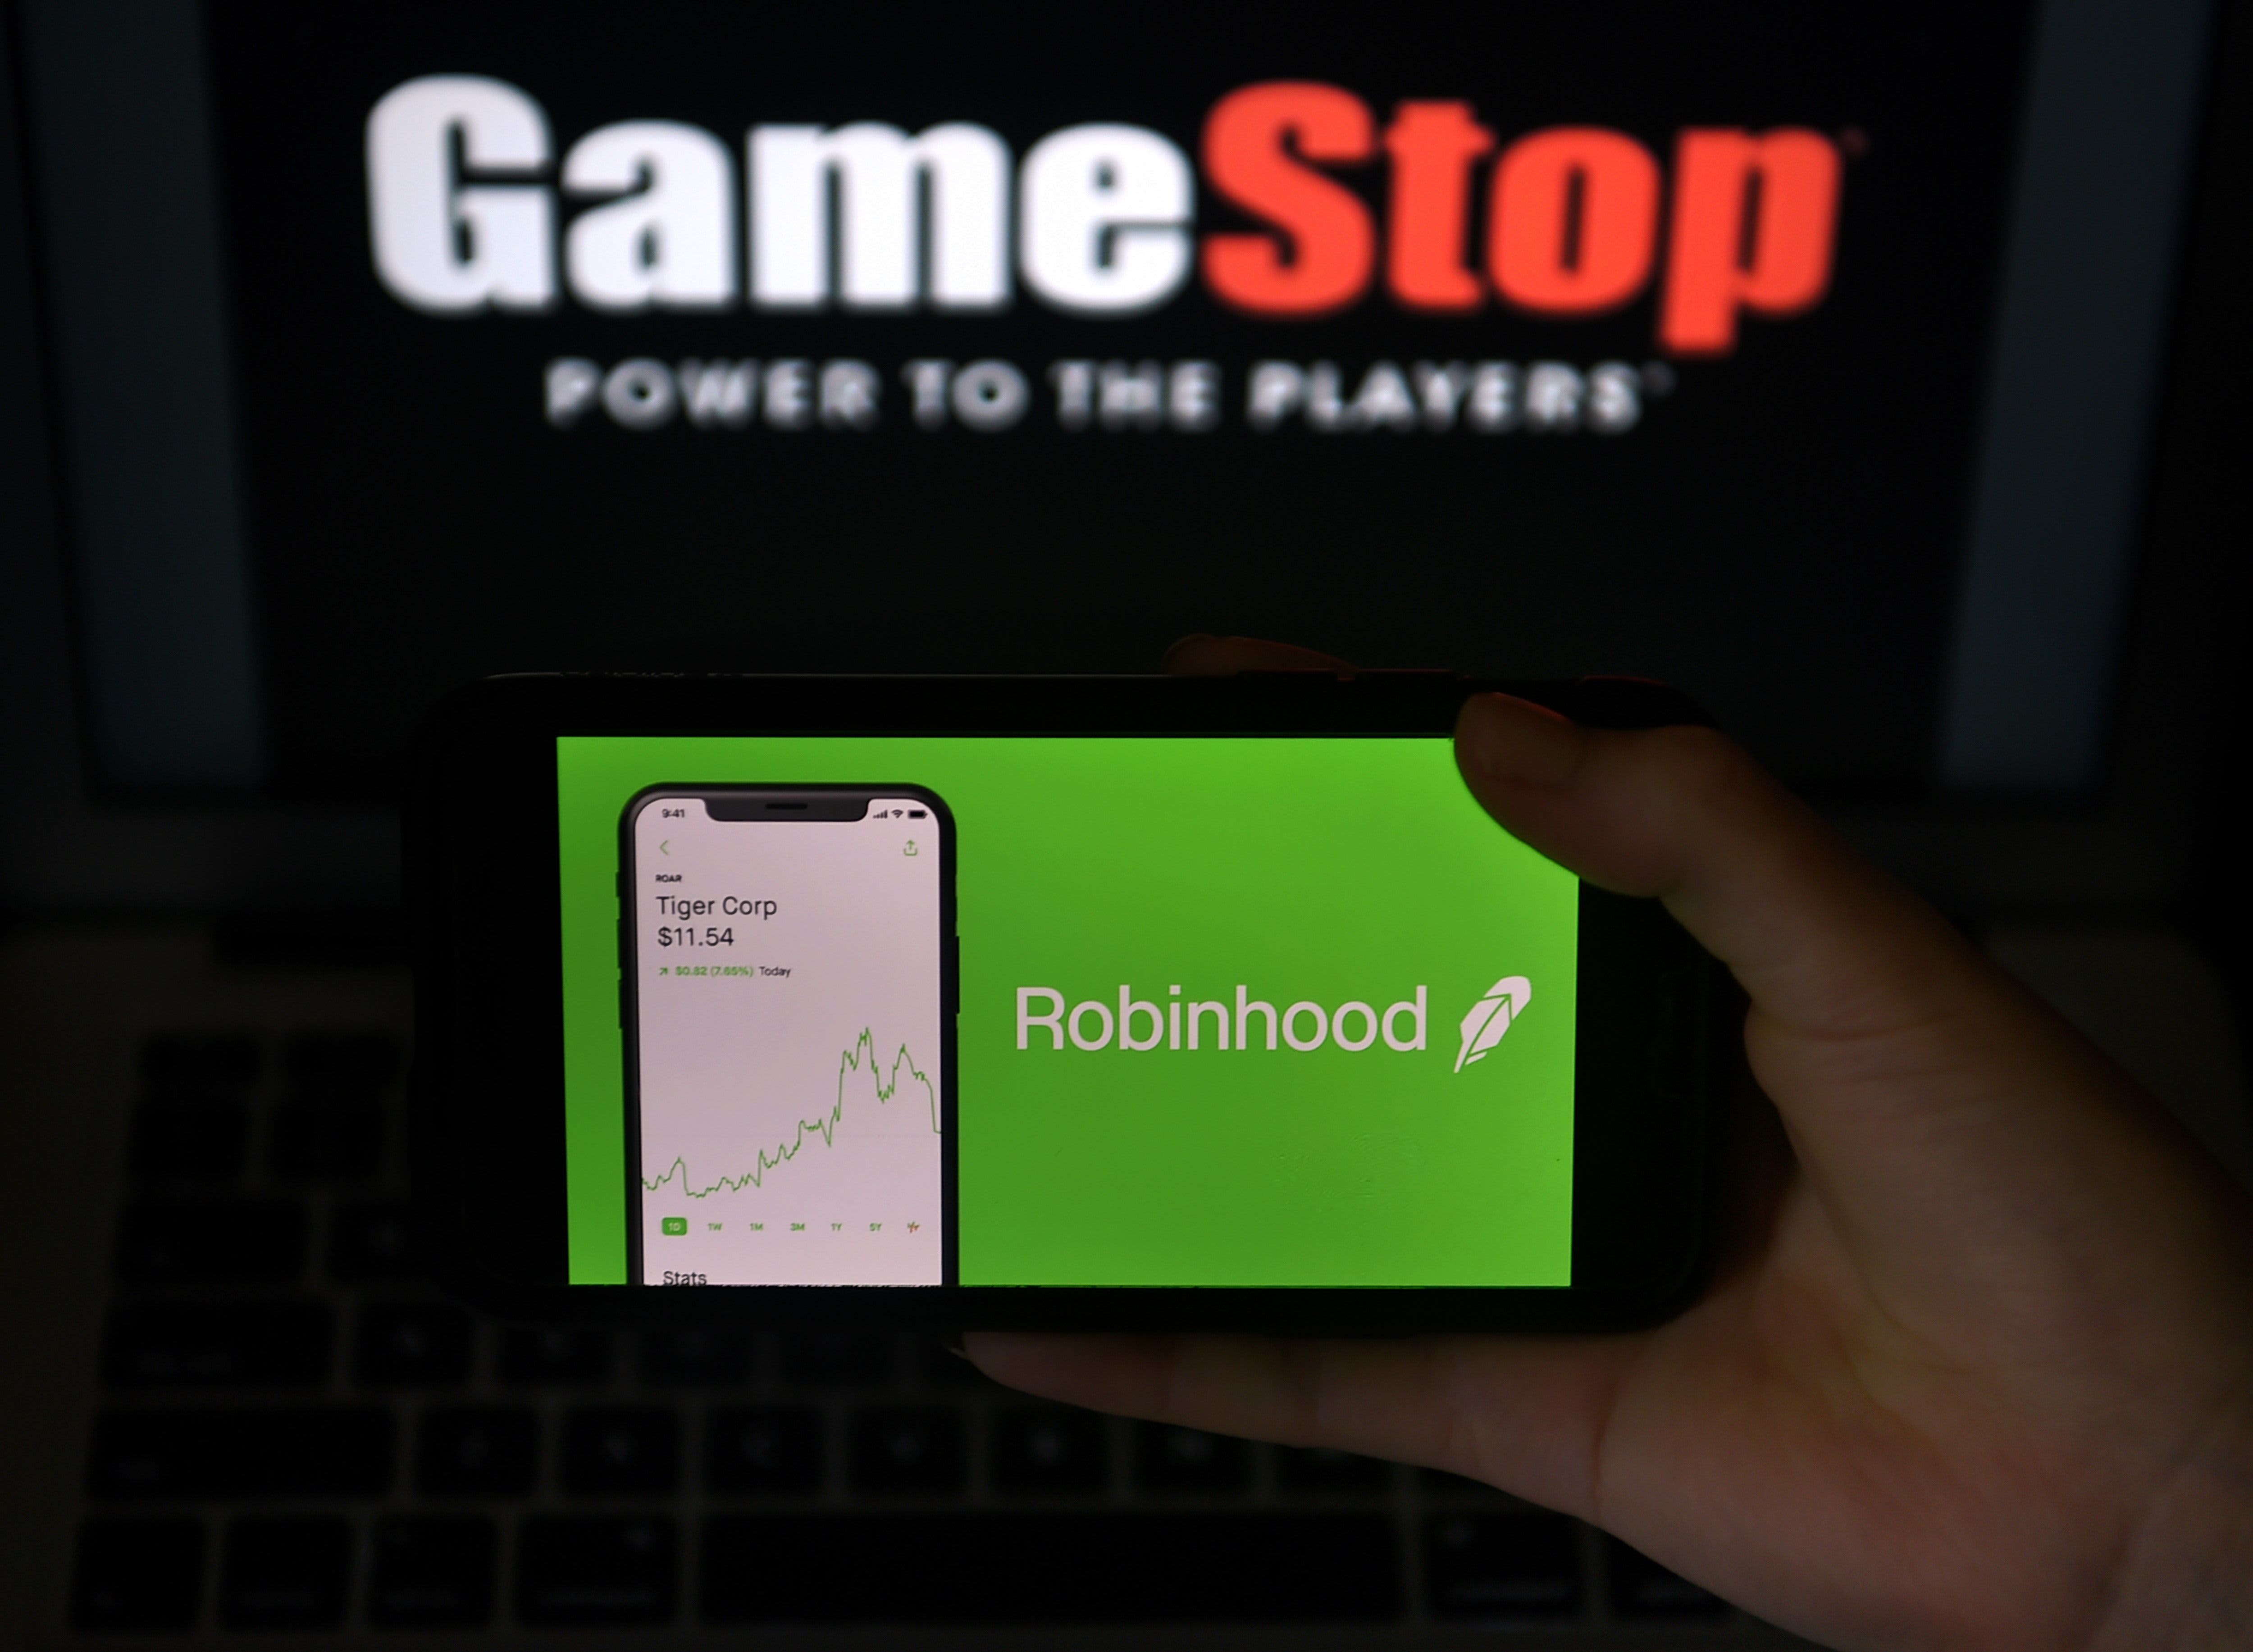 Reddit user who helped inspire GameStop mania says he lost $13 million on Tuesday, but is still holding on